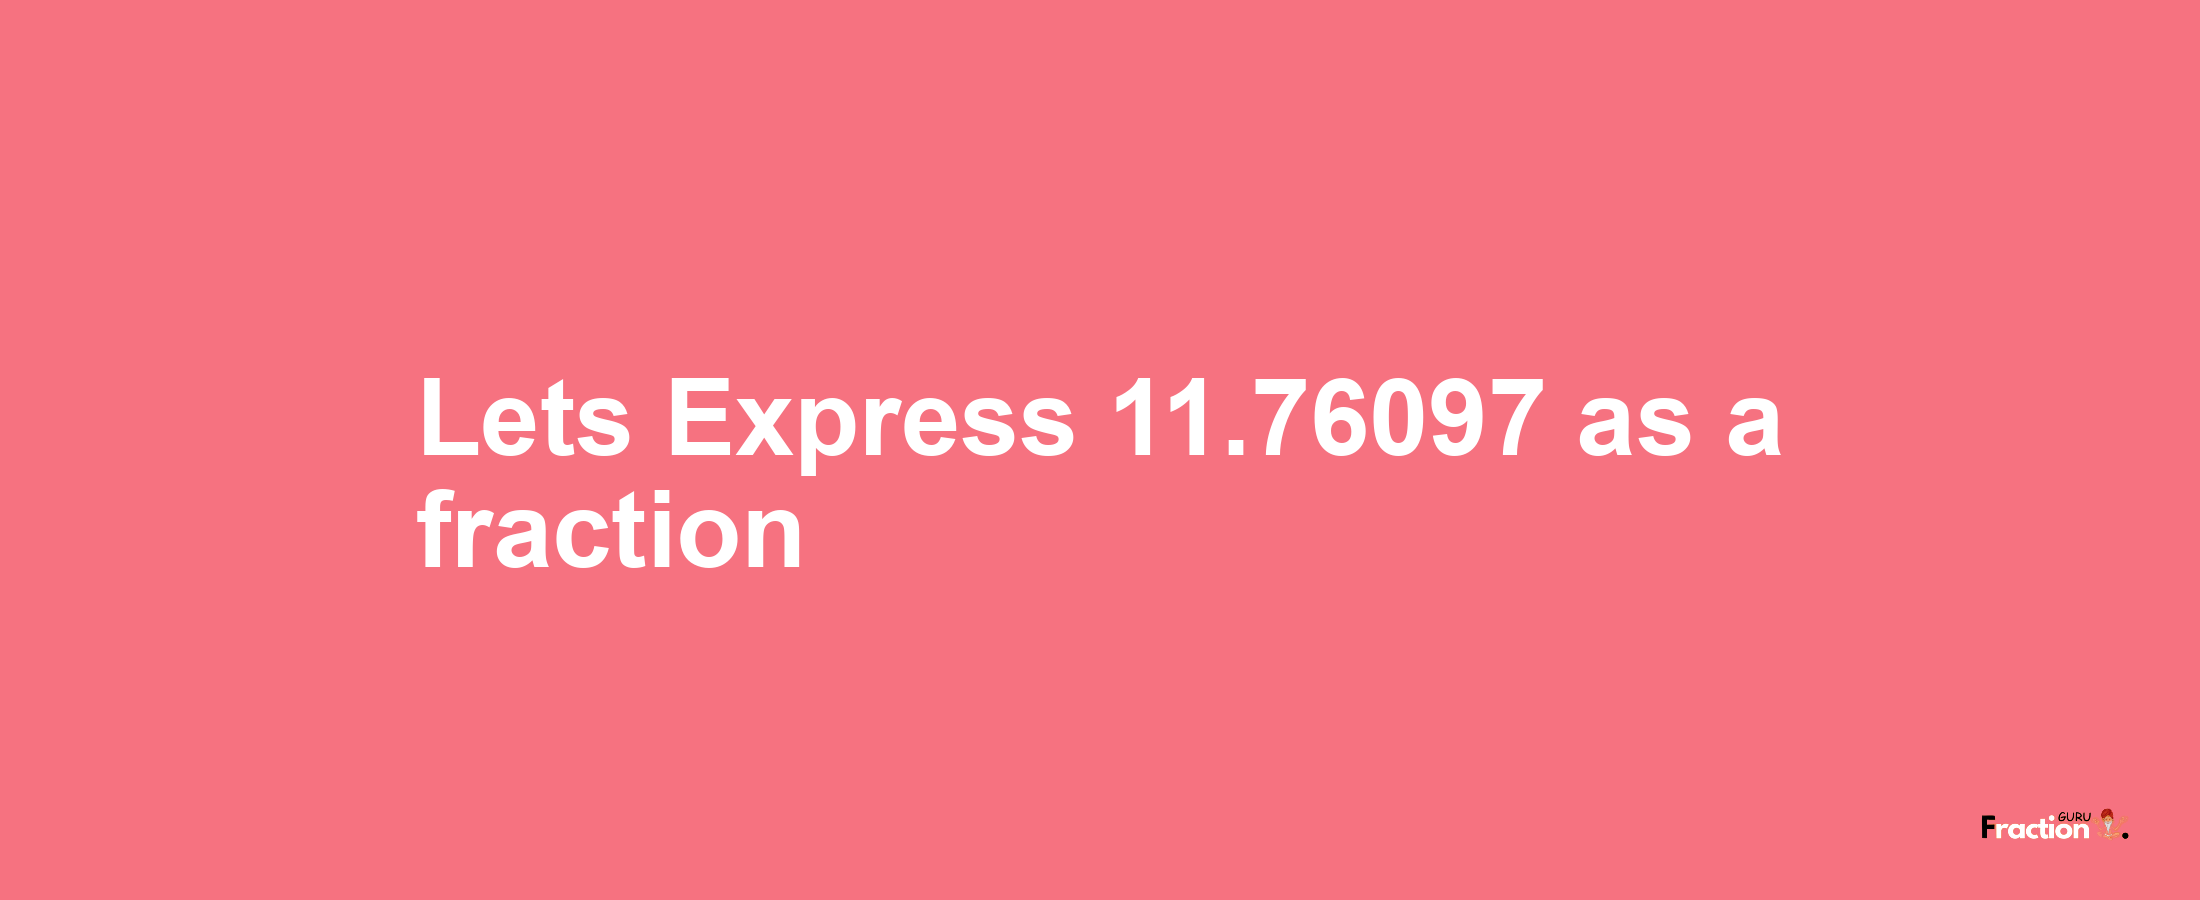 Lets Express 11.76097 as afraction